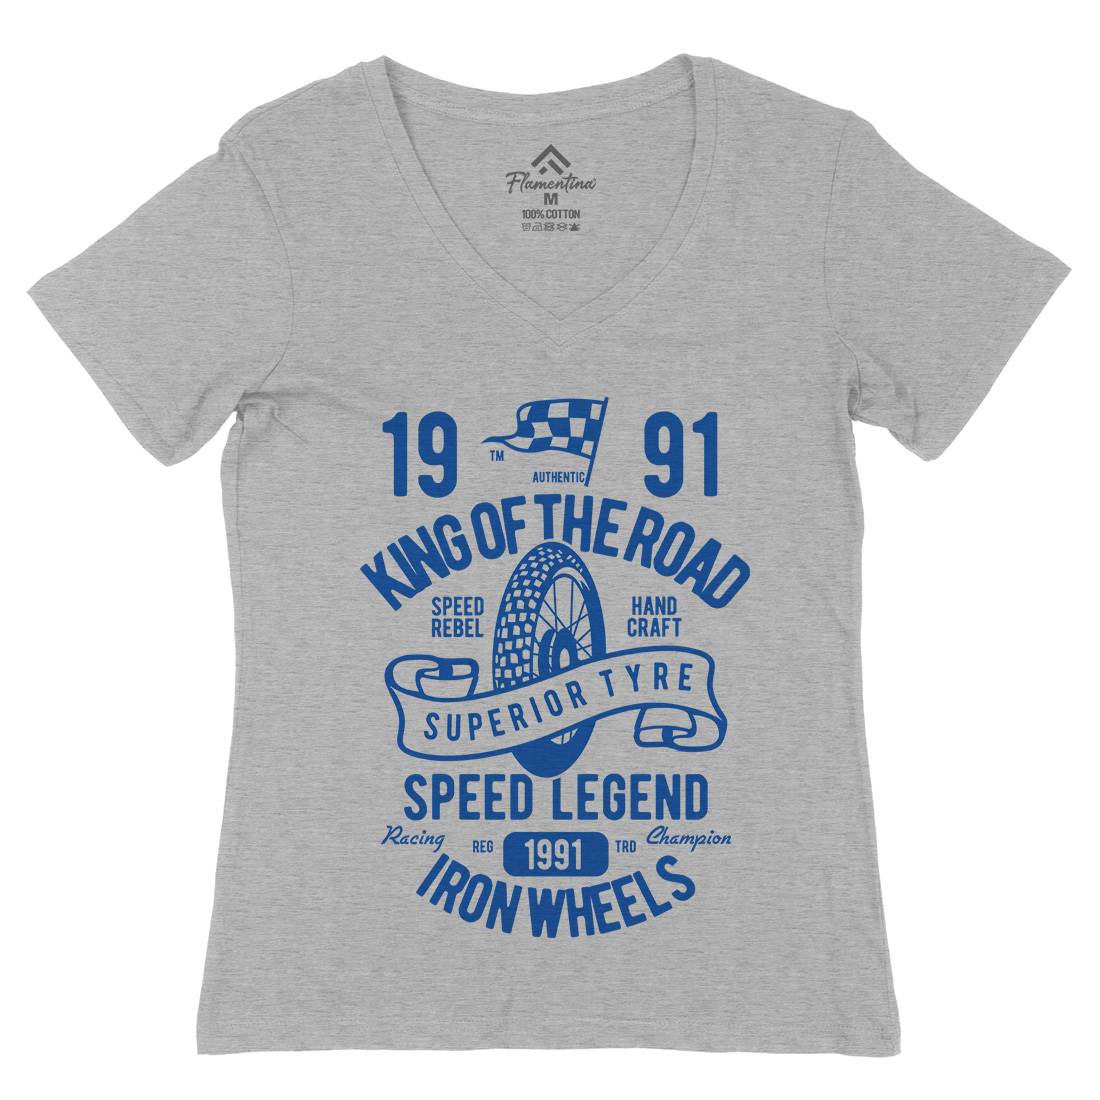 Superior Tyre King Of The Road Womens Organic V-Neck T-Shirt Motorcycles B458